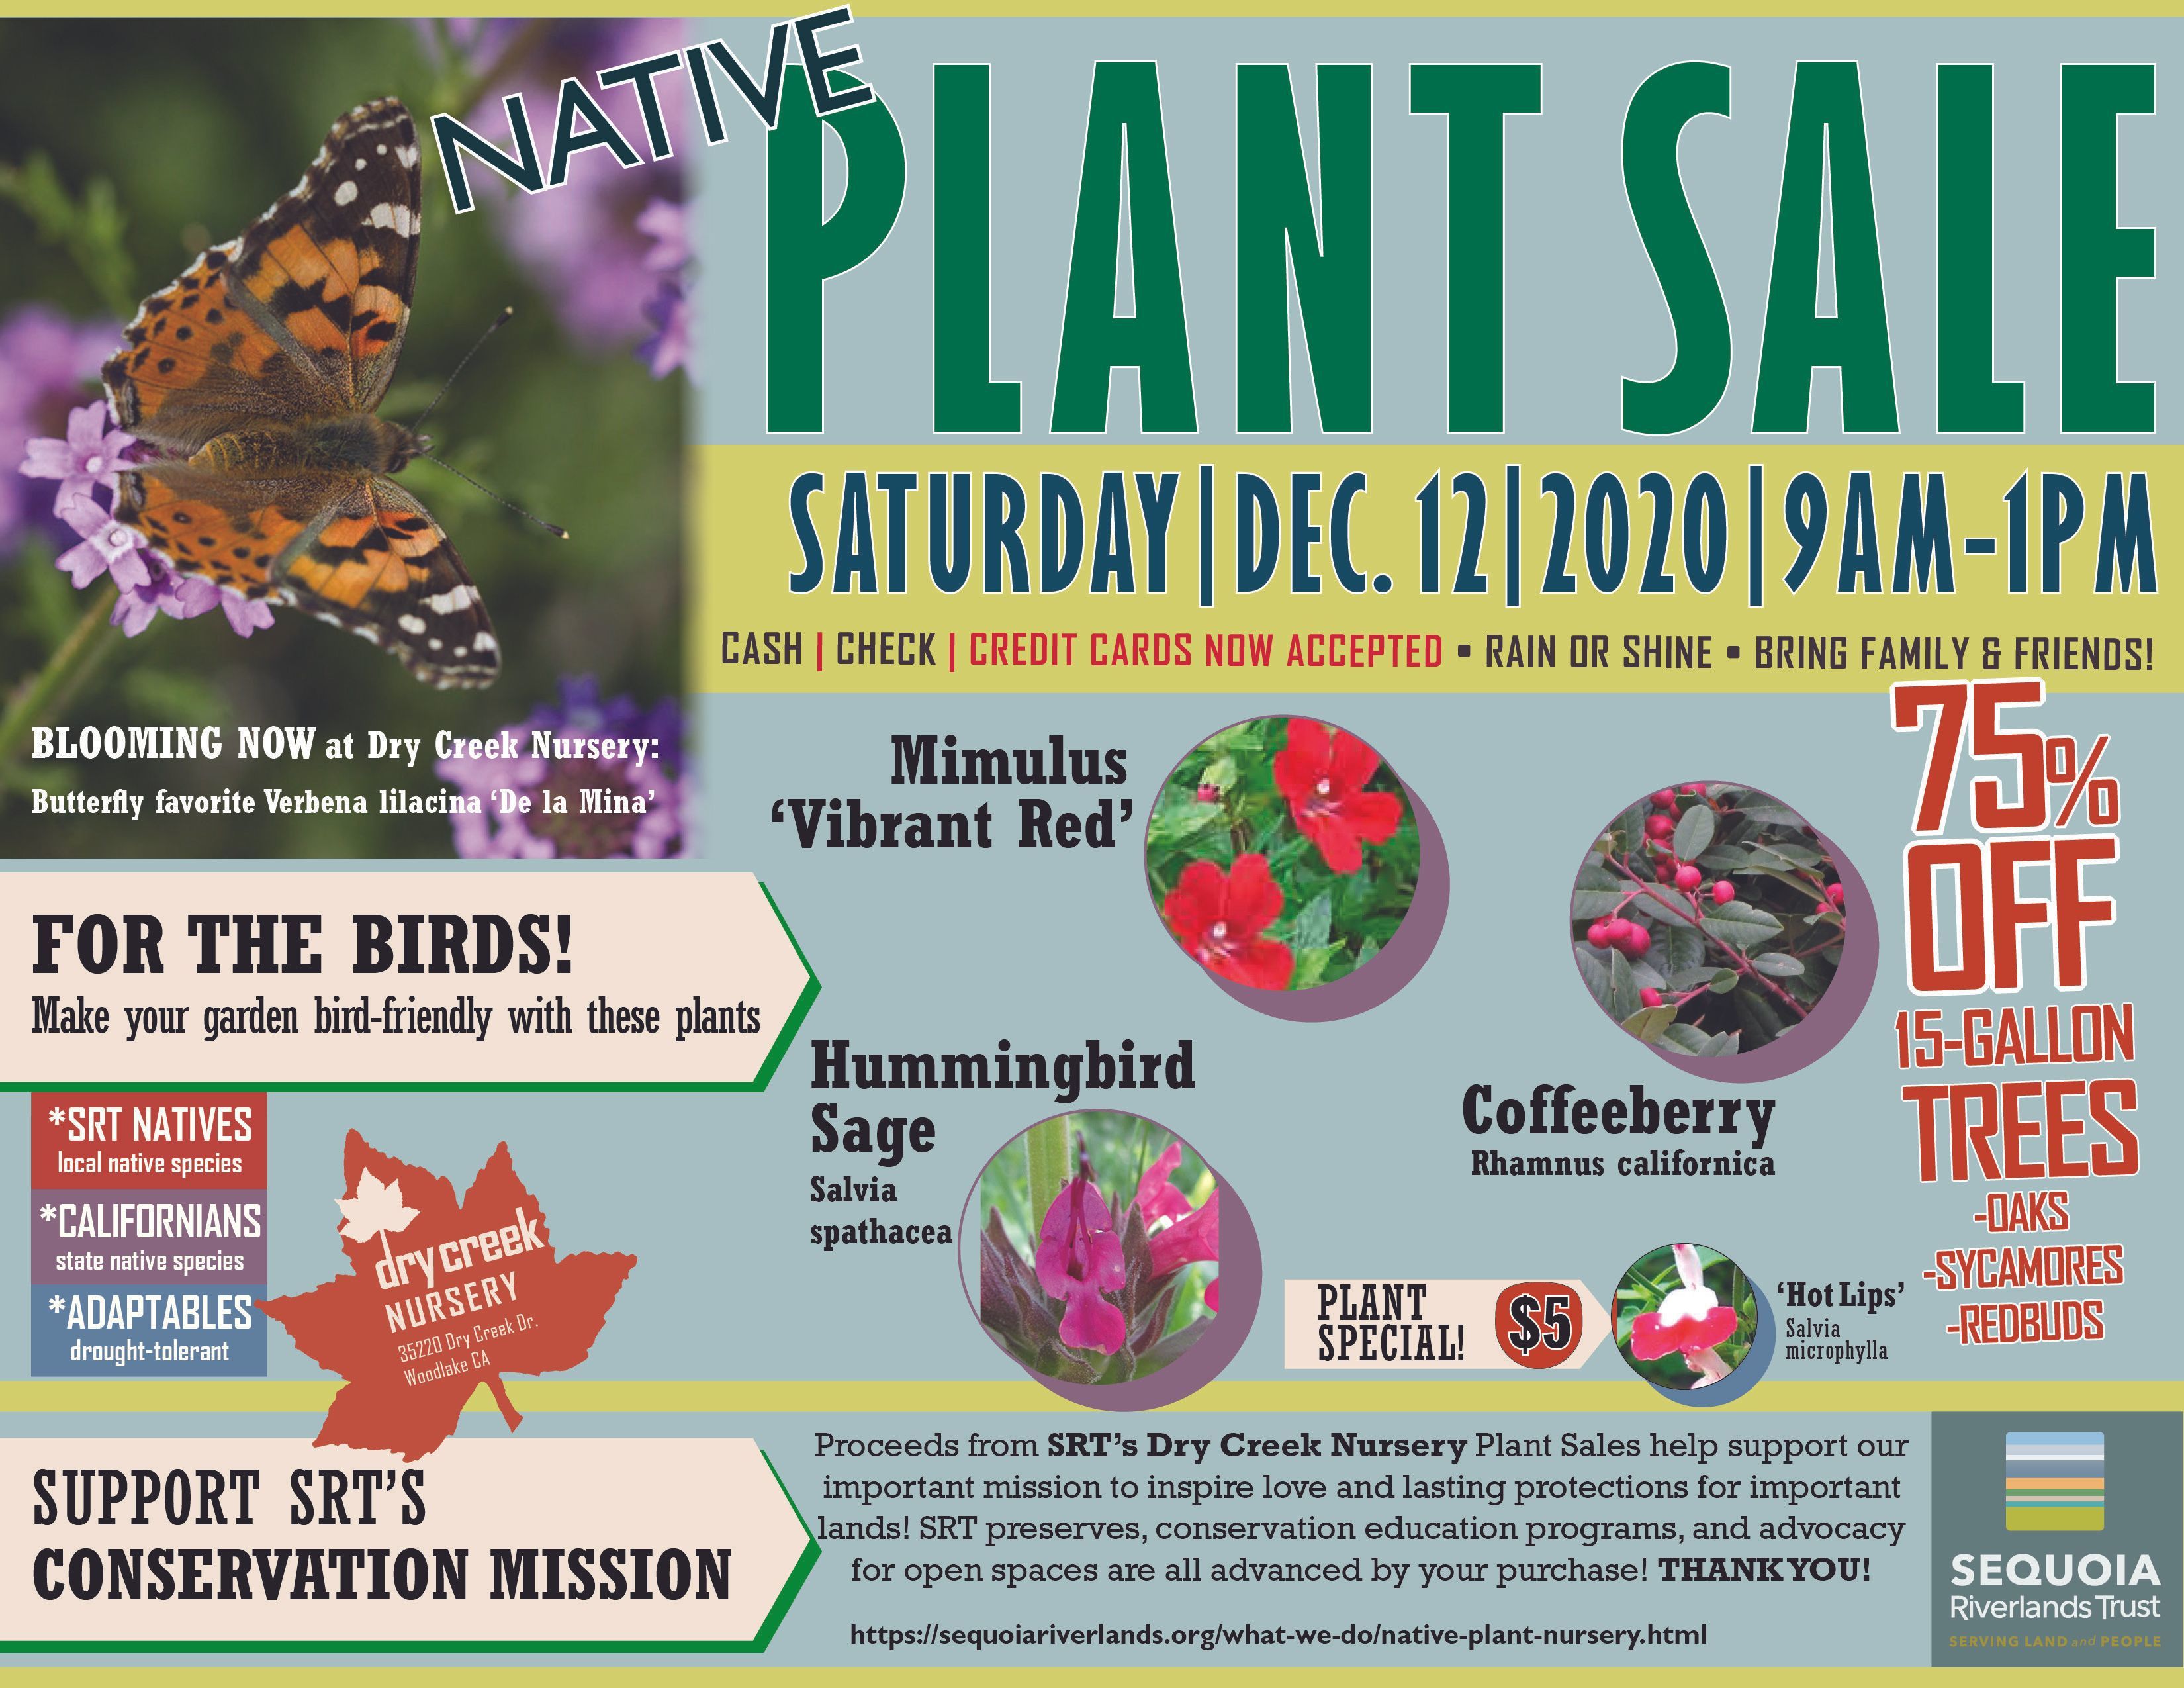 [CANCELLED DUE TO COVID] FINAL NATIVE PLANT SALE of the year at SRT Dry Creek 12/12